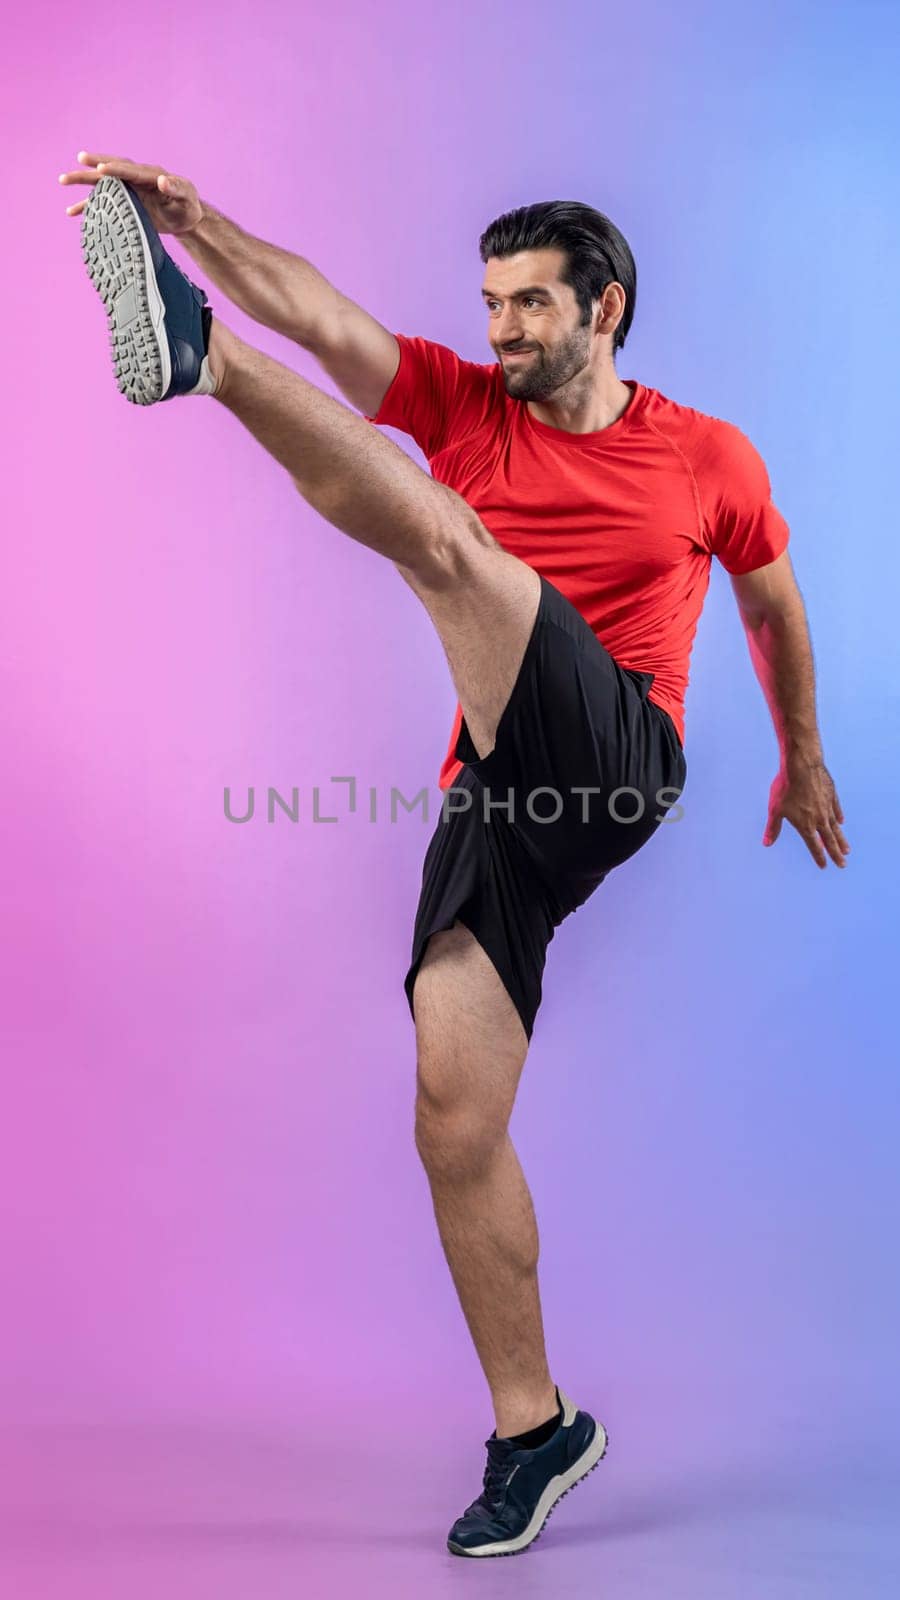 Full body length gaiety shot athletic and sporty young man with fitness in cardio exercise, kicking position posture on isolated background. Healthy active and body care lifestyle.